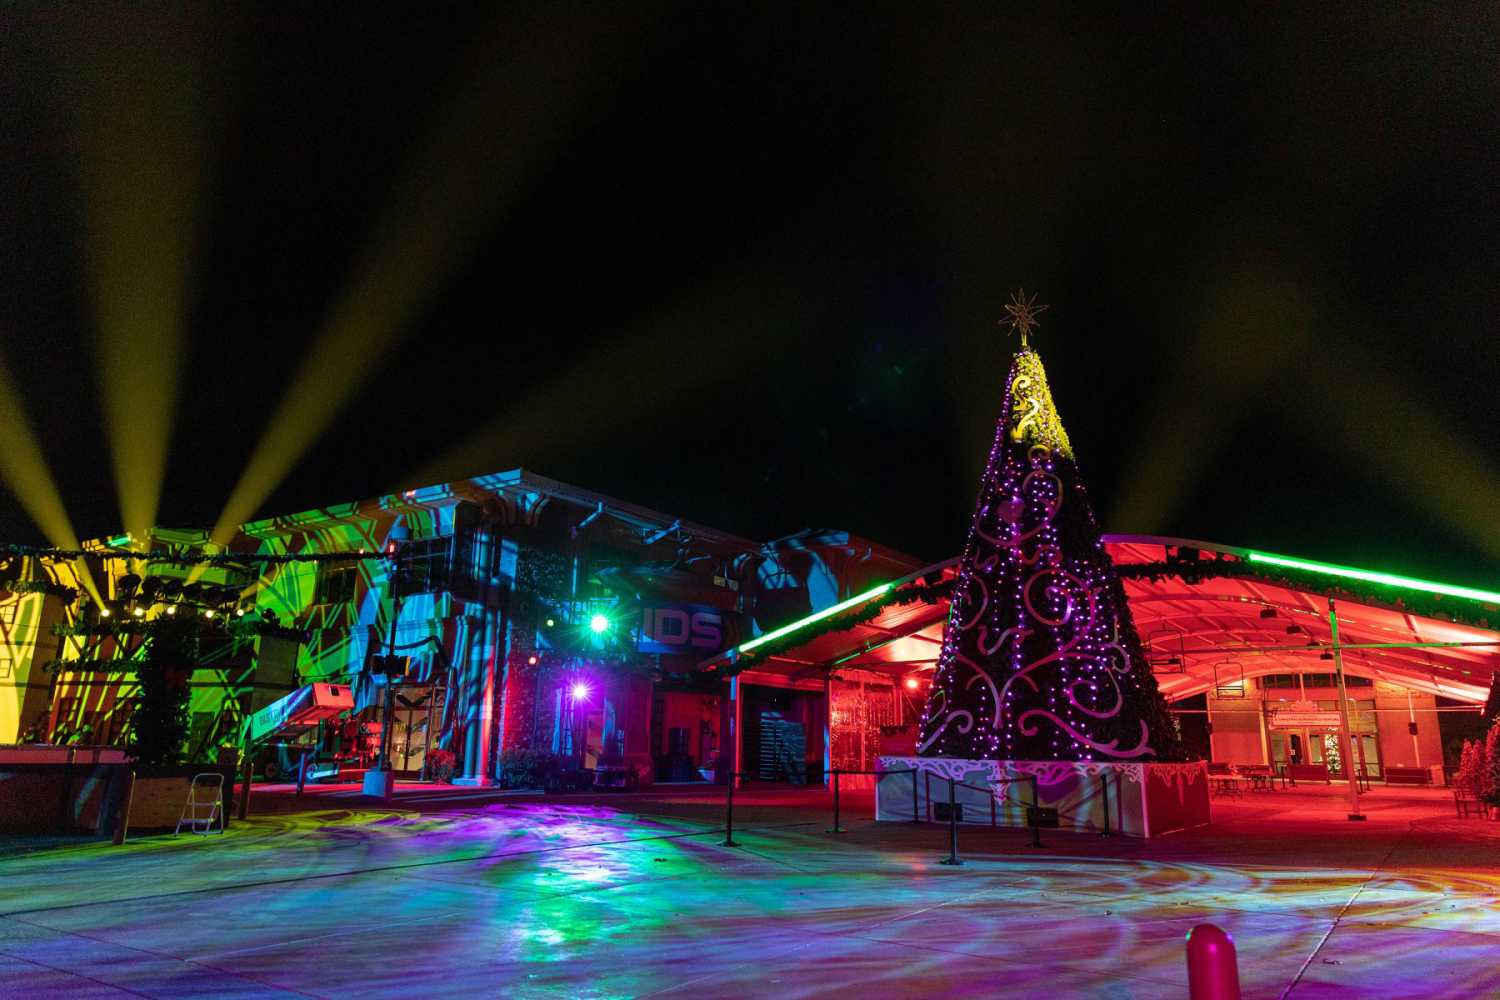 The festive holiday experience was enhanced using IP-rated luminaires from Elation